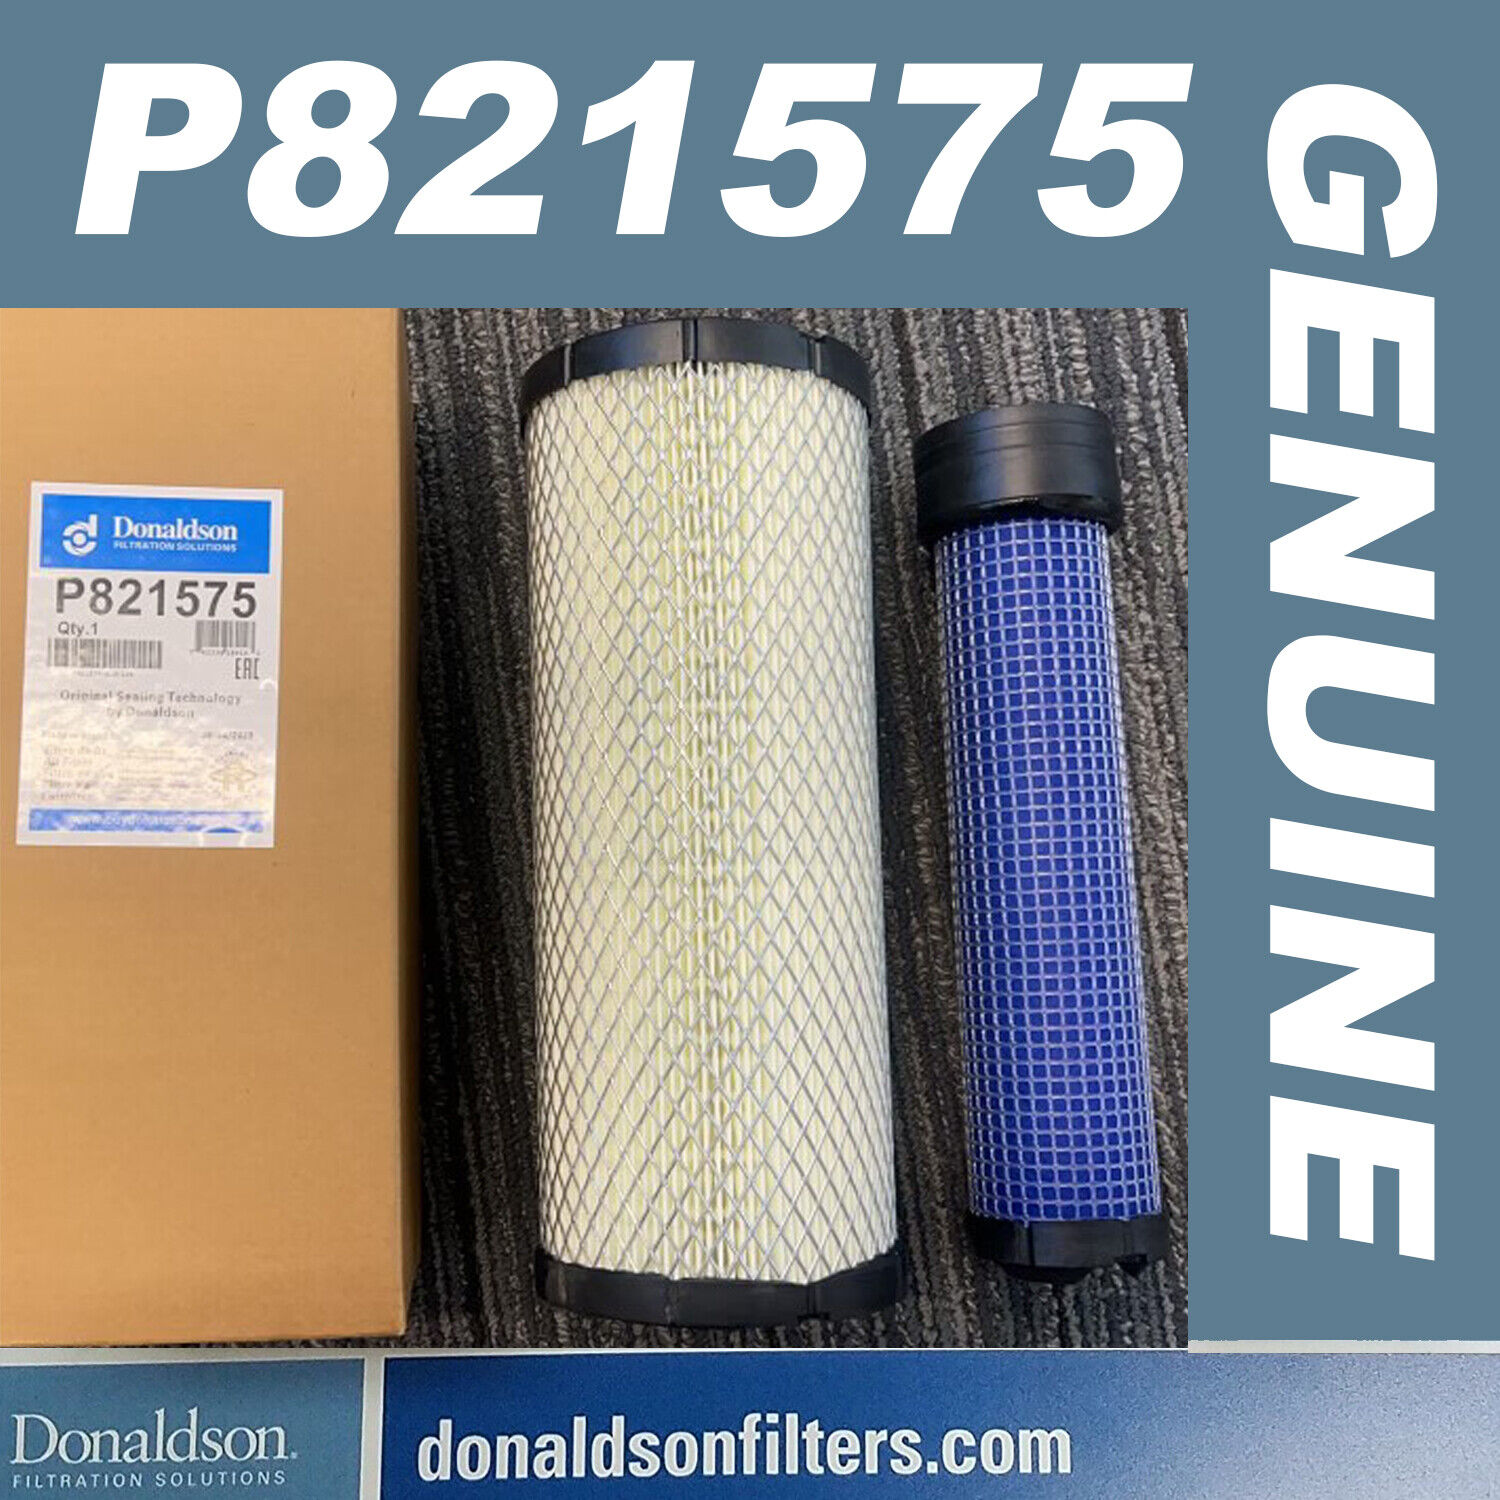 NEW GENUINE P821575 + P822858 Air Filter Sets for Donaldson FPG05 AIR CLEANERS